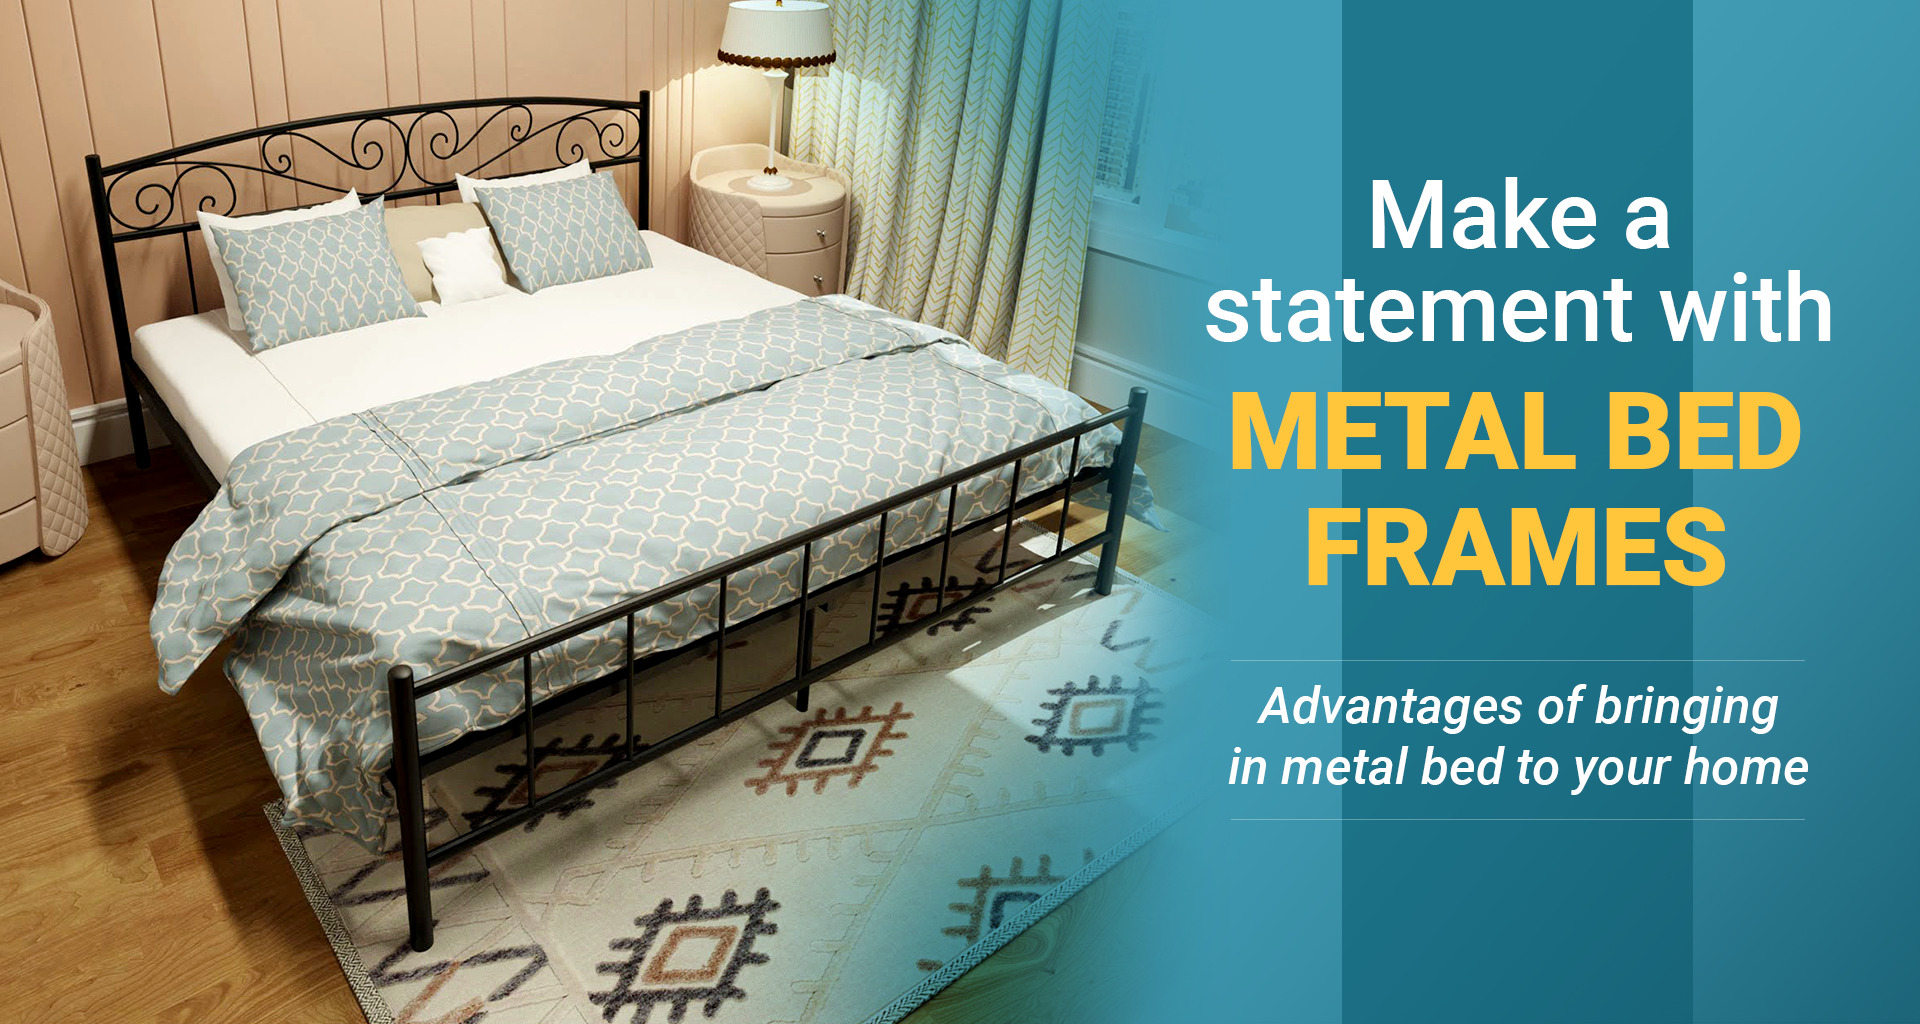 Advantages of Bringing in Metal Bed to Your Home